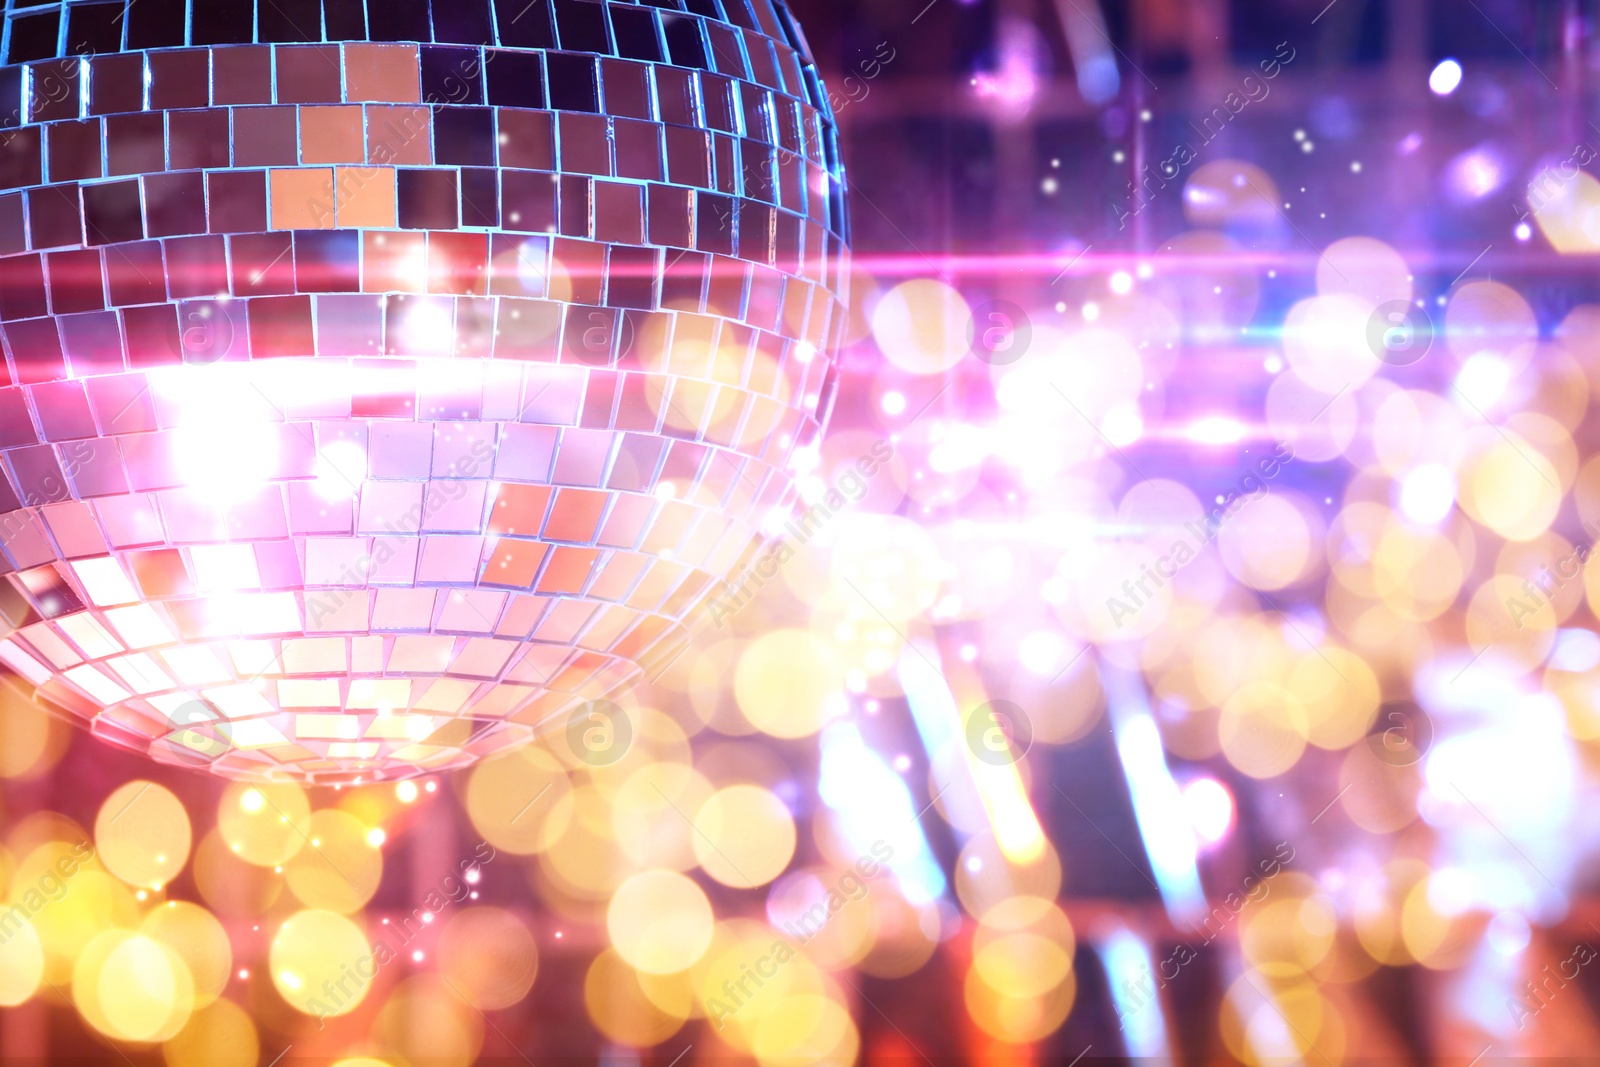 Image of Shiny disco ball on bright background with blurred lights, bokeh effect